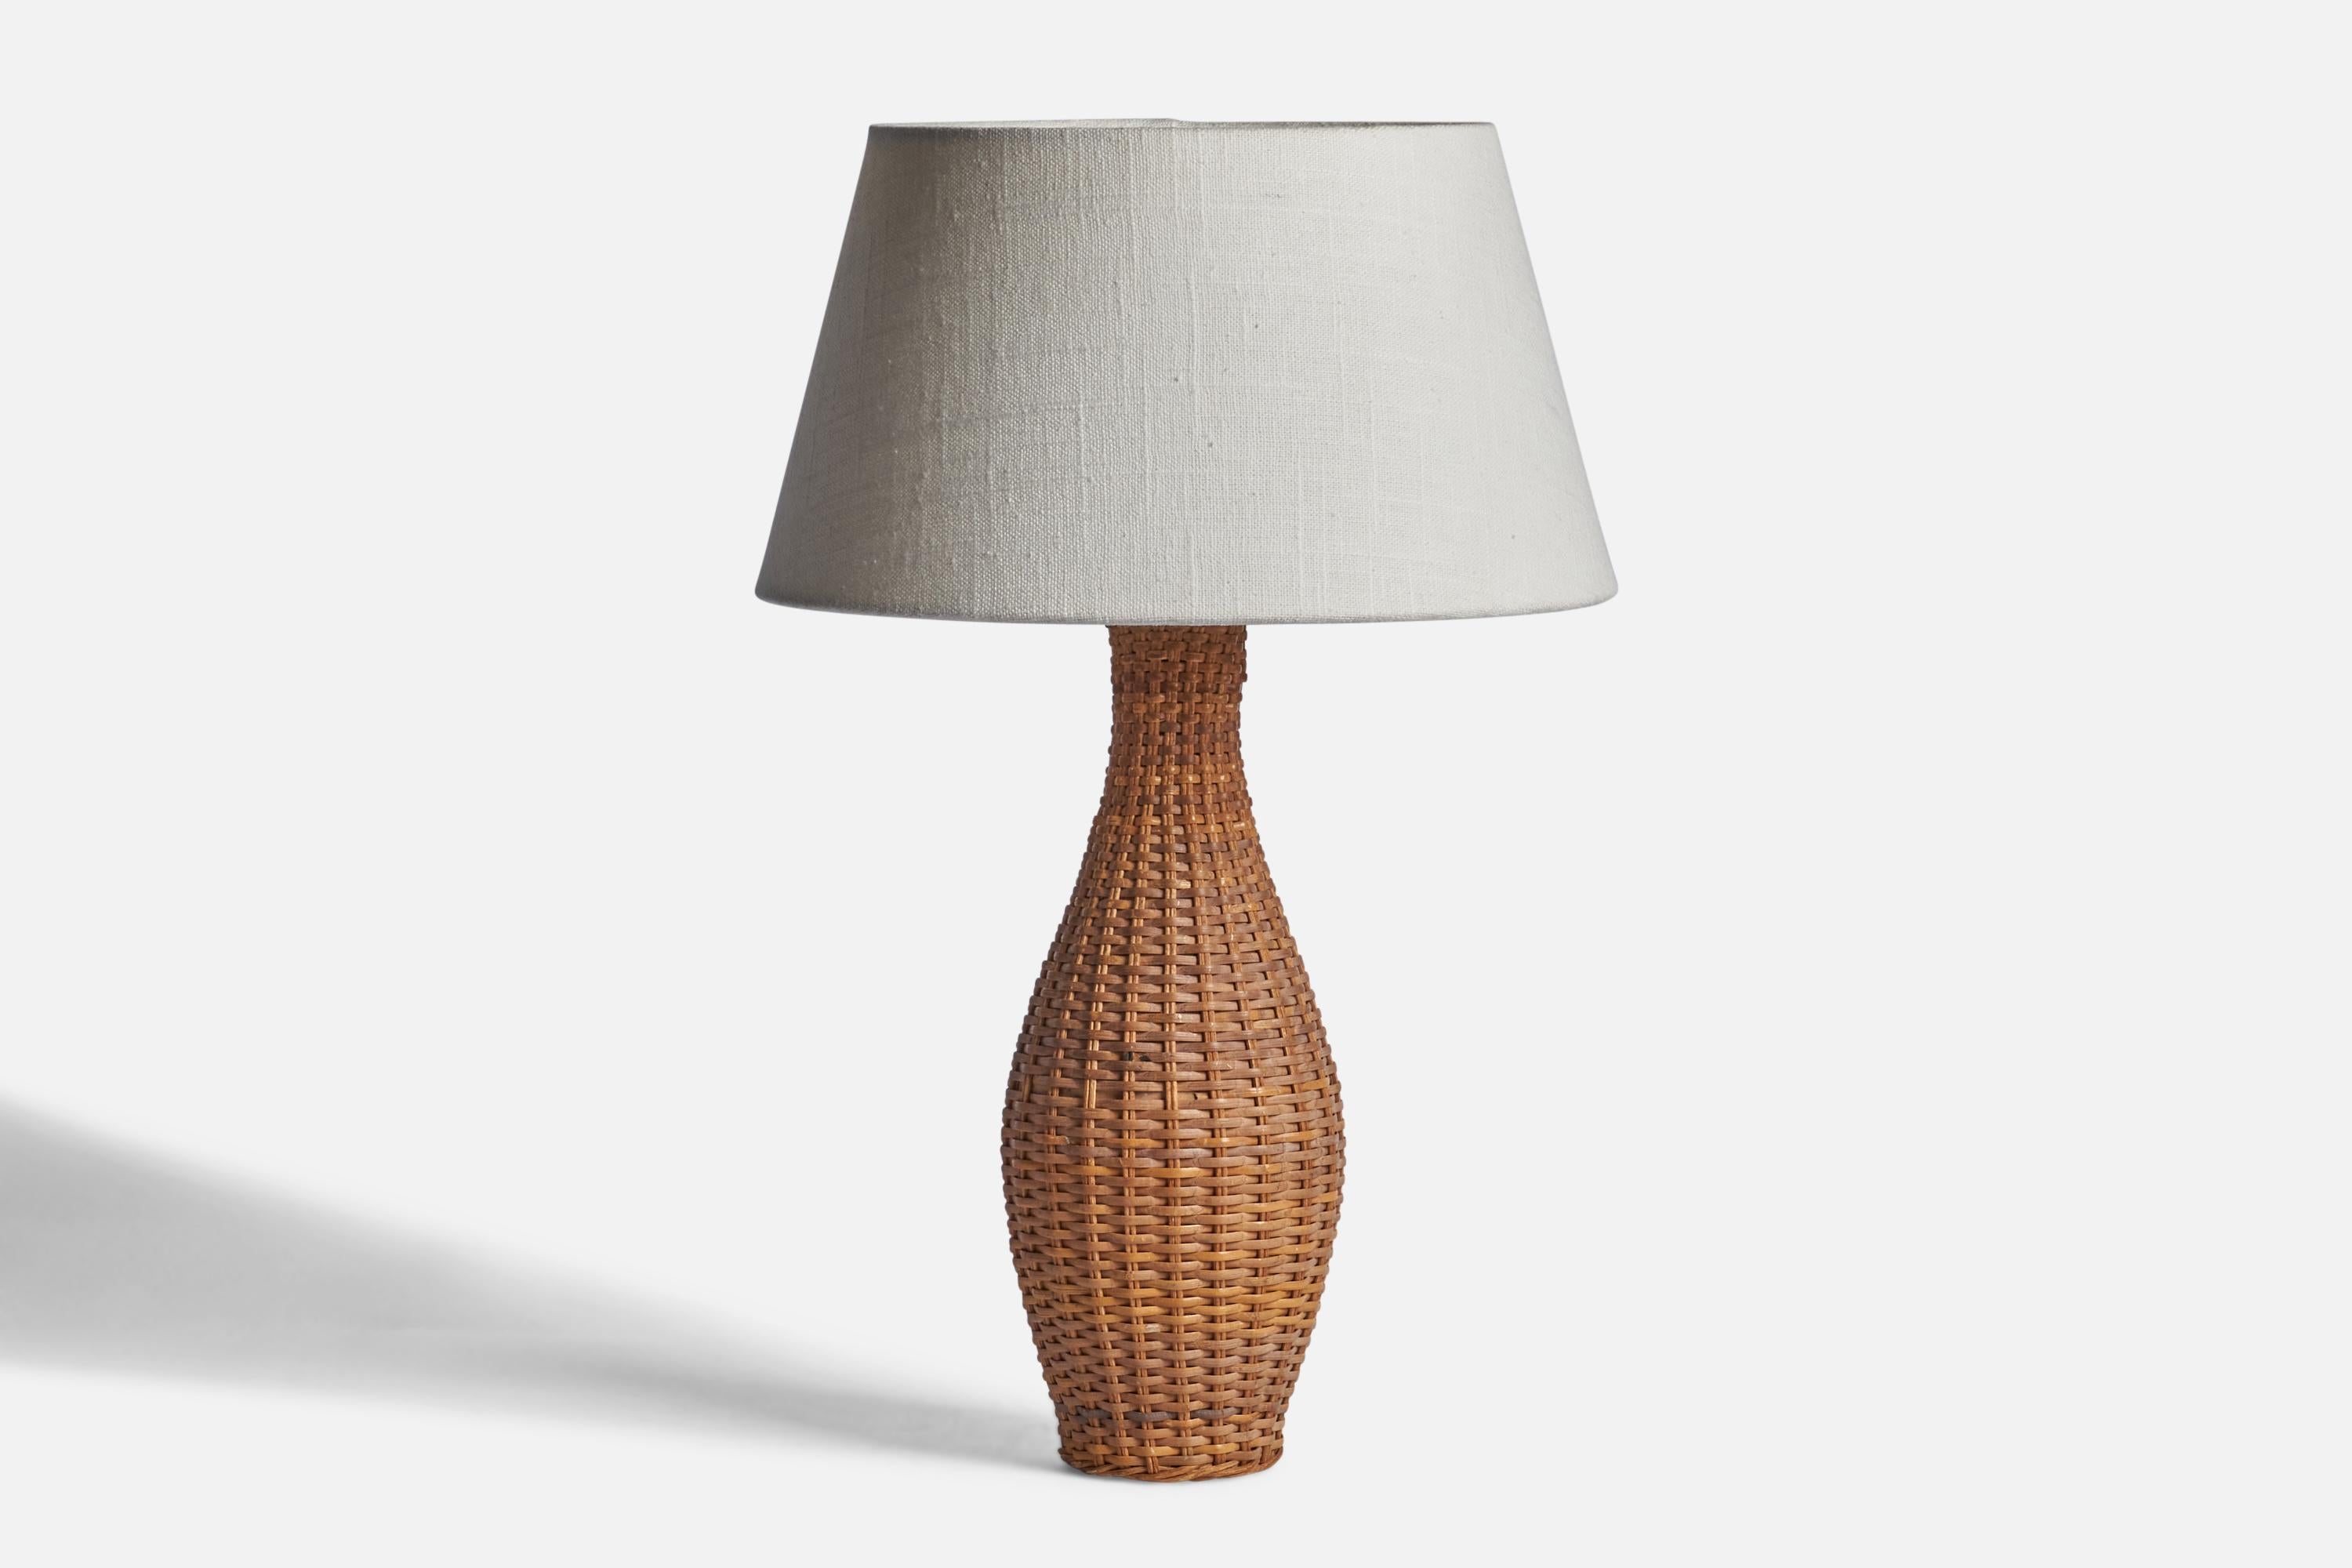 A woven rattan table lamp designed and produced in Sweden, 1960s.

Dimensions of Lamp (inches): 12.25” H x 3.75” Diameter
Dimensions of Shade (inches): 7” Top Diameter x 10” Bottom Diameter x 5.5” H 
Dimensions of Lamp with Shade (inches): 15.85” H